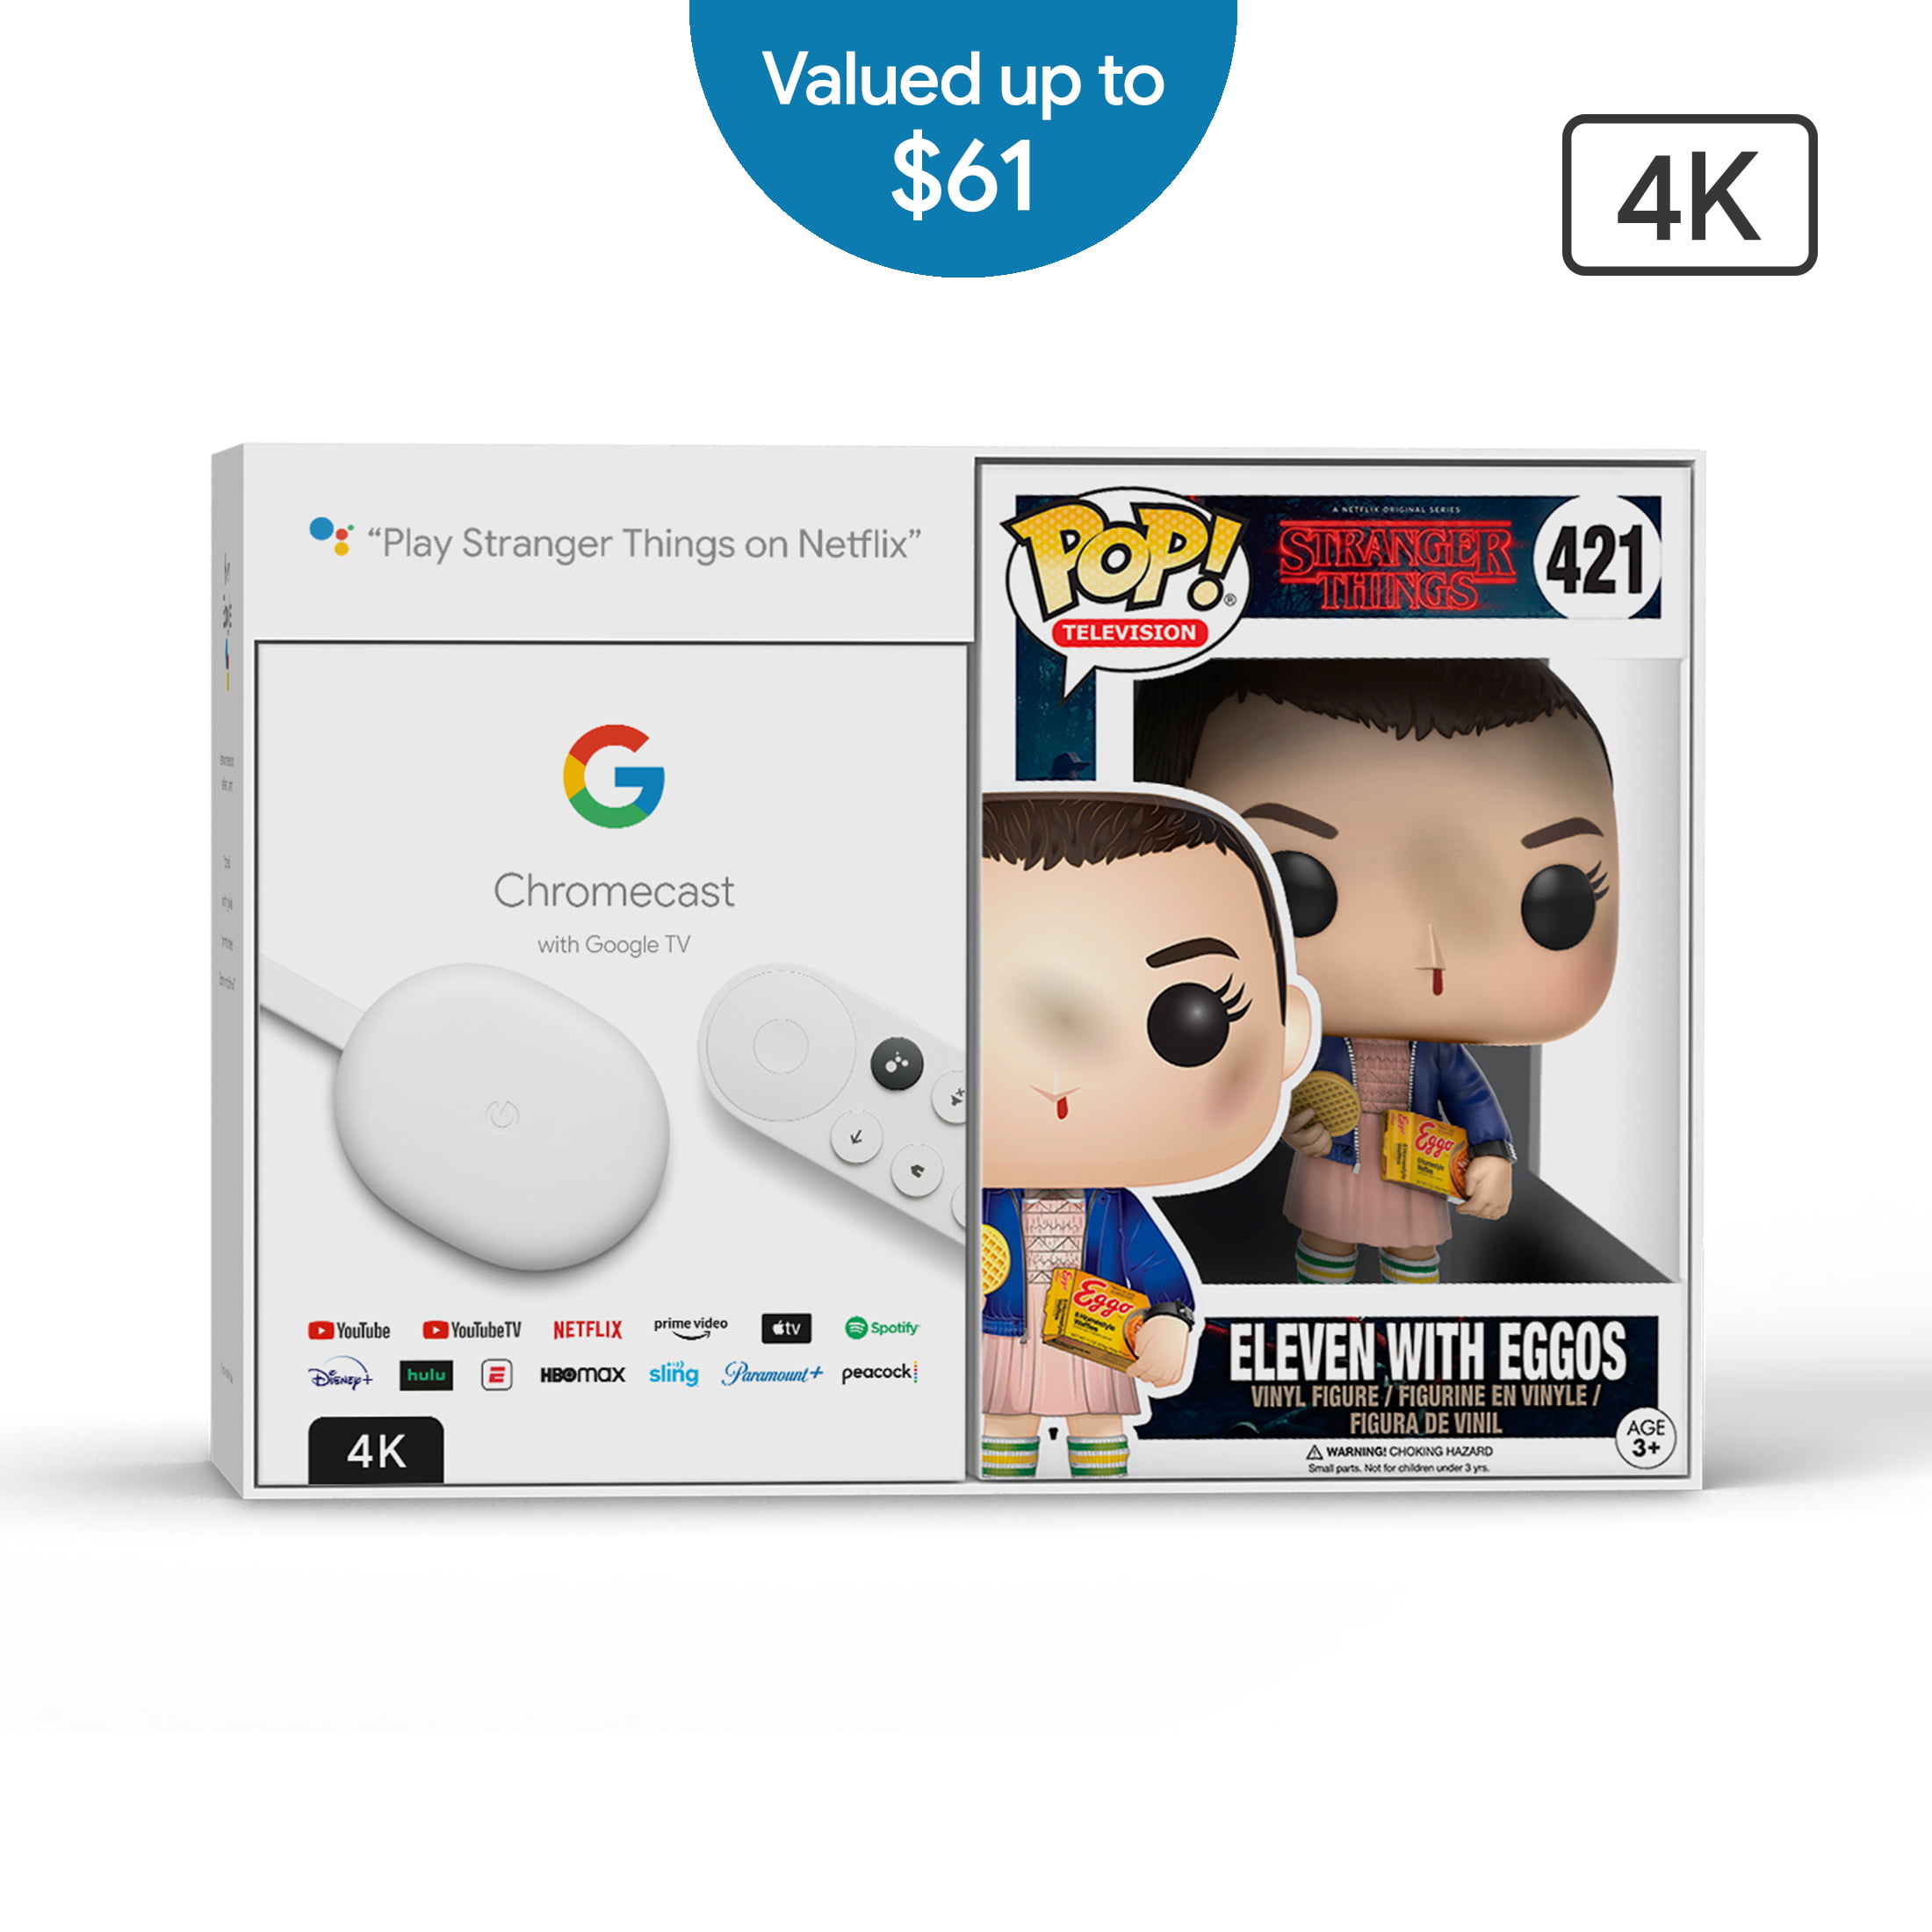 Chromecast with Google TV (4K) Streaming Media Player - with Funko POP! TV Stranger Things Eleven with Eggos $29 at Walmart YMMV